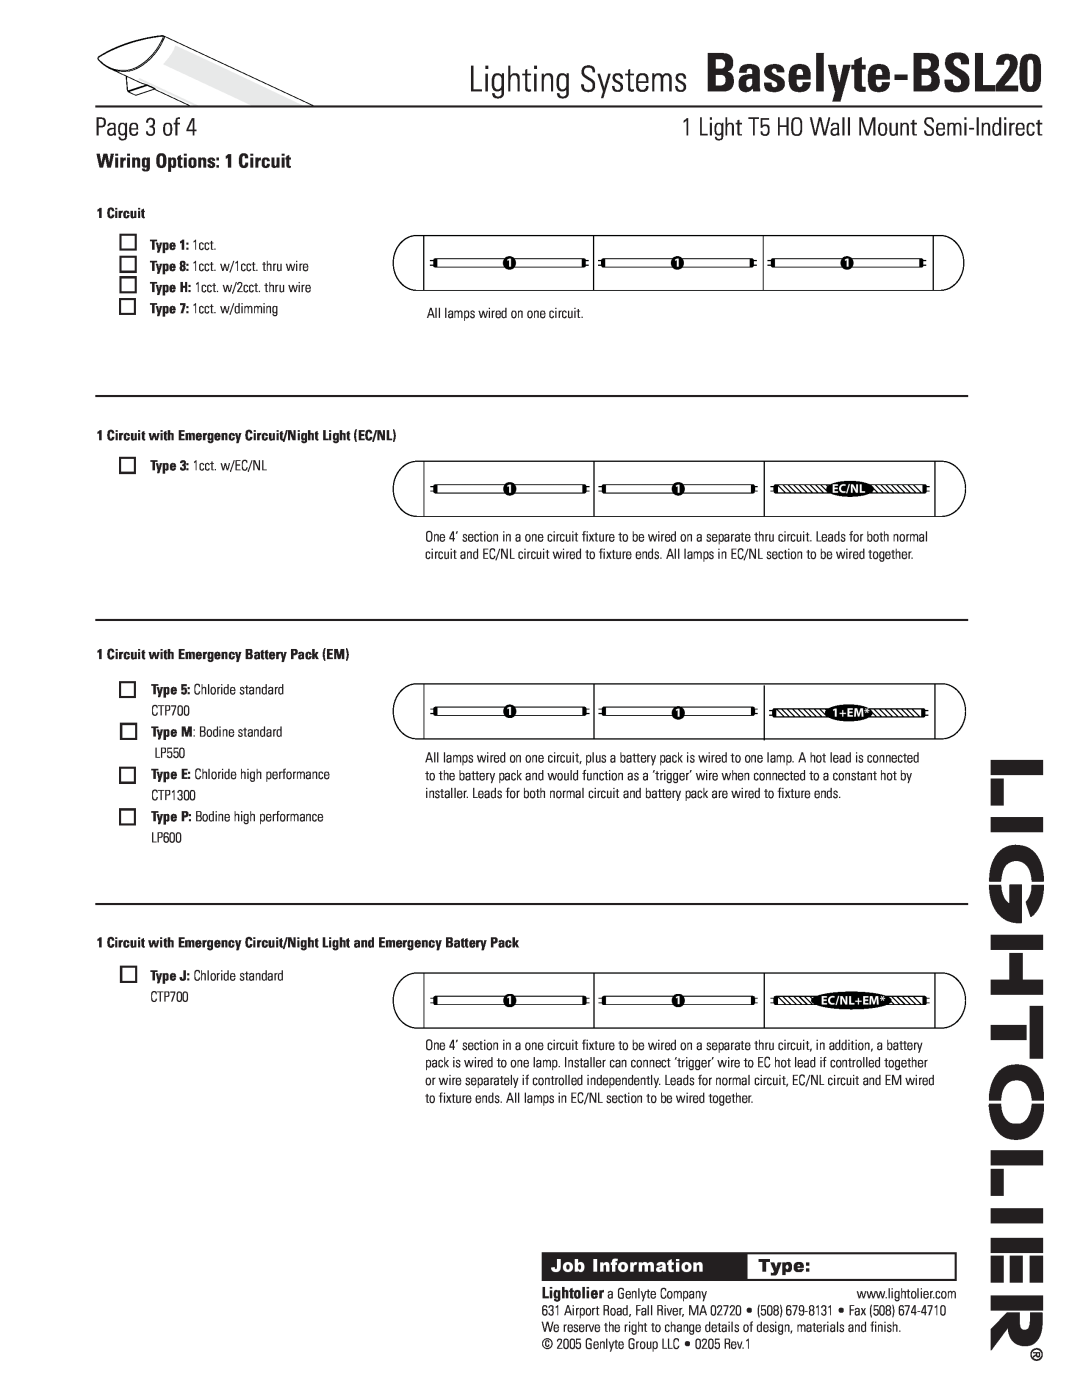 Lightolier Baselyte-BSL20 Wiring Options 1 Circuit, Circuit Type 1 1cct, Circuit with Emergency Battery Pack EM, Page of 